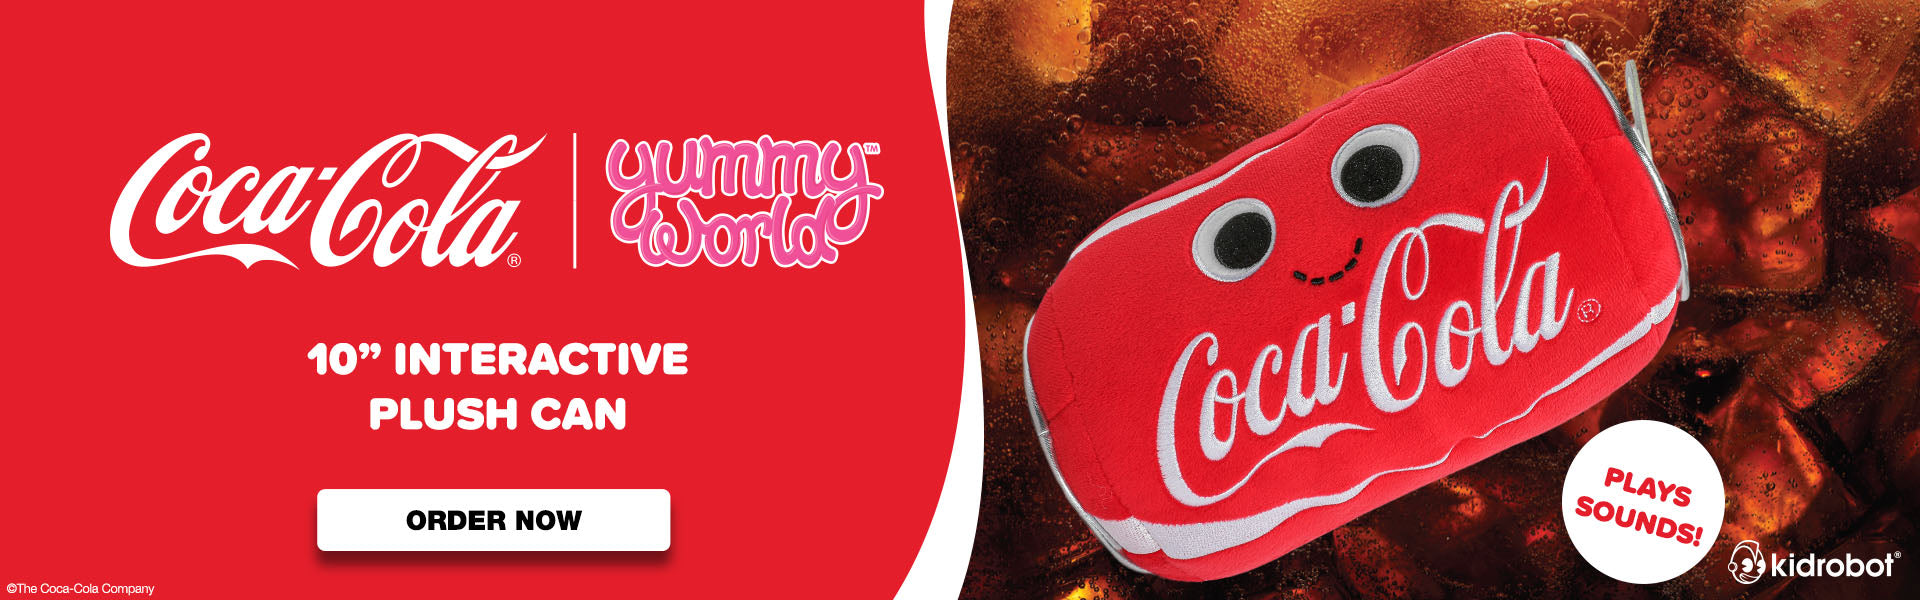 Coca-Cola x Yummy World Interactive Plush Coke Can with Sound - Pre-order now at Kidrobot.com